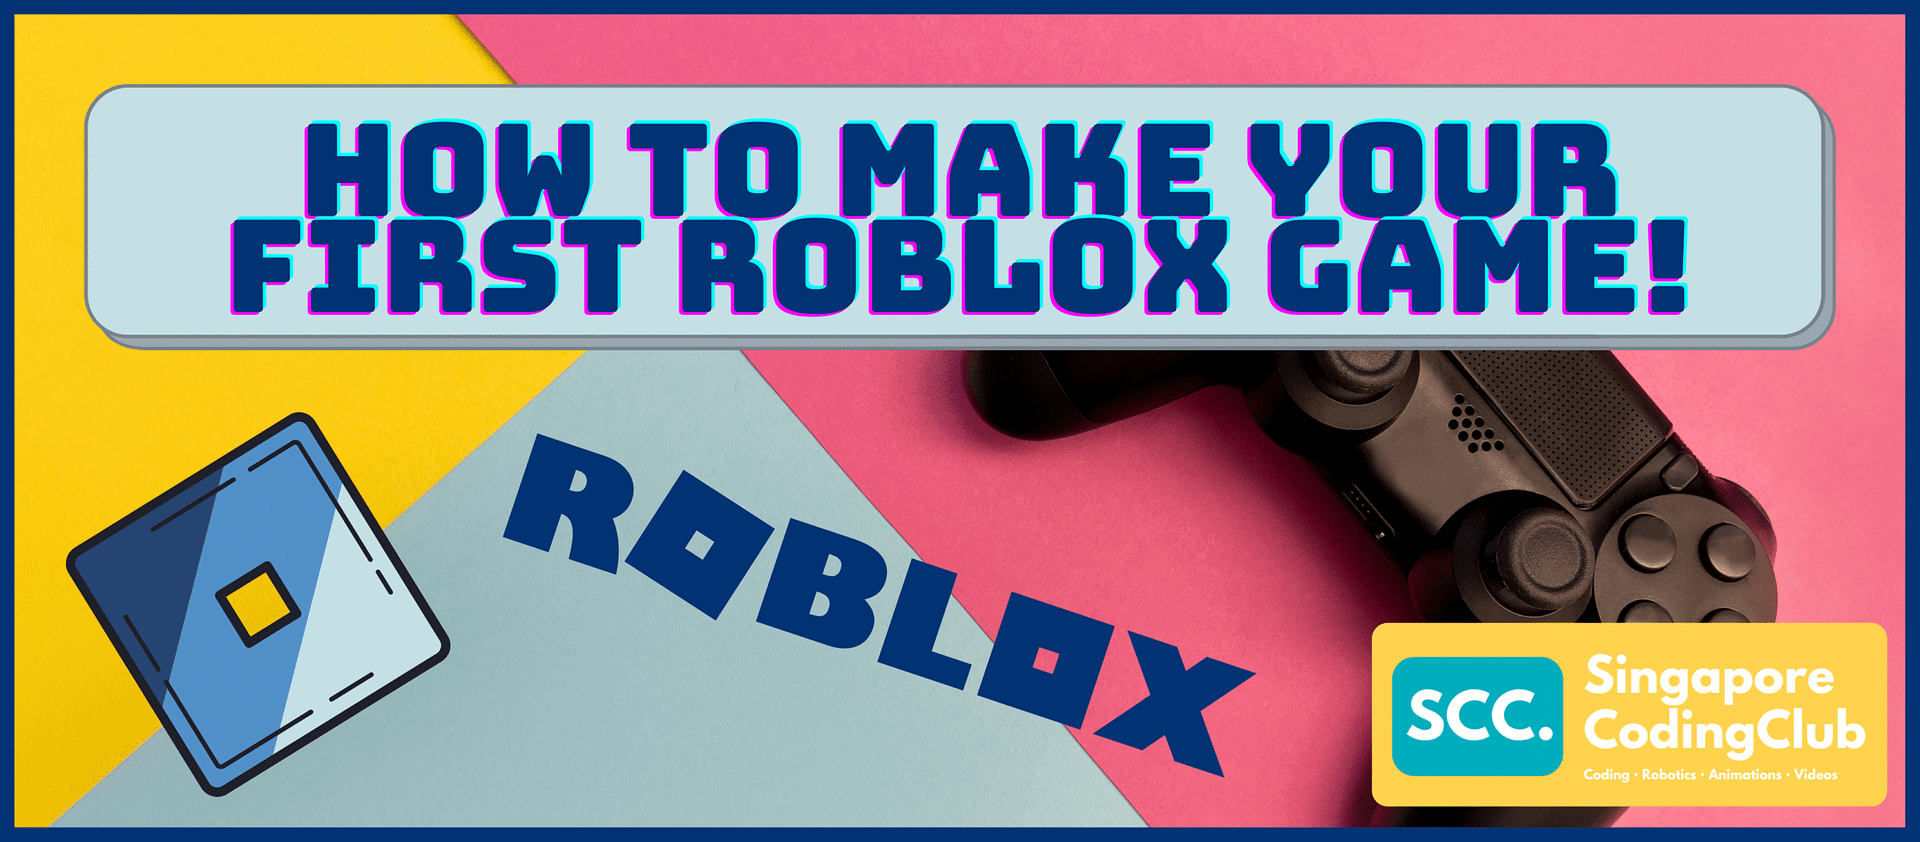 There Are ROBLOX CARD CODES In This Video! 